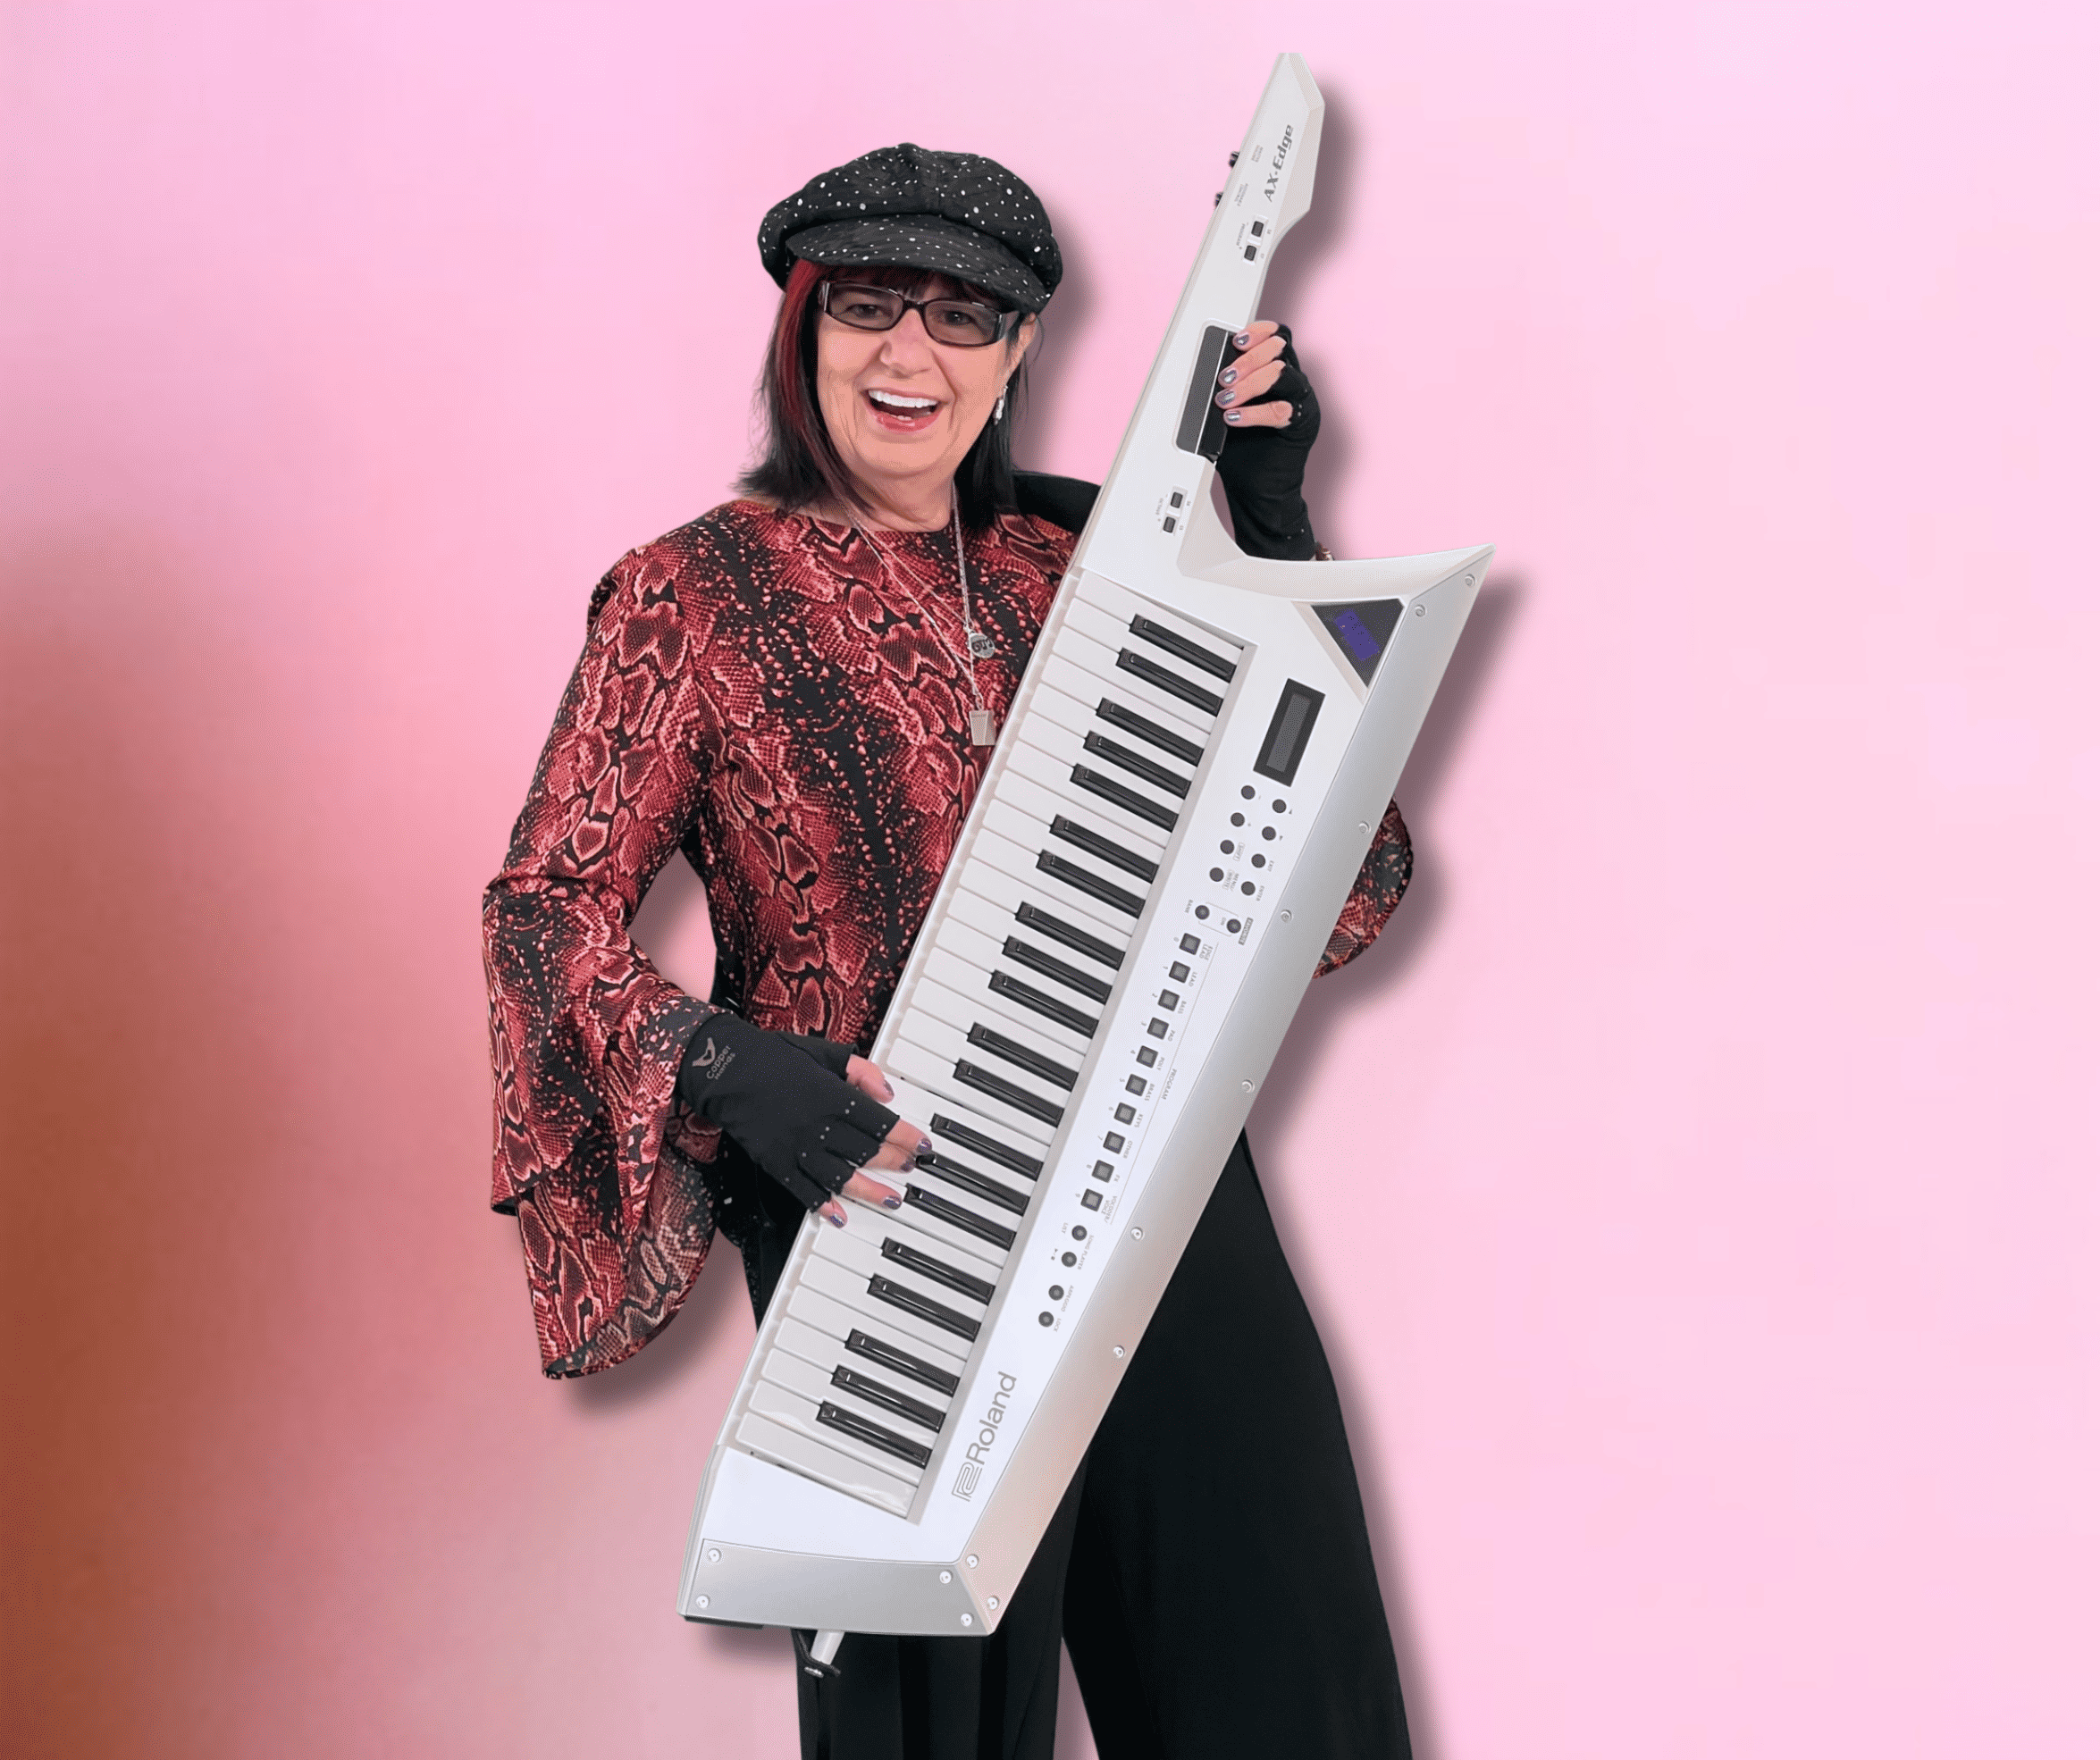 Gail Taylor holding a keytar and smiling, dressed in a patterned shirt, black trousers, and a cap, against a pink background, embodies the midlife pivot from finance to music inspiration.